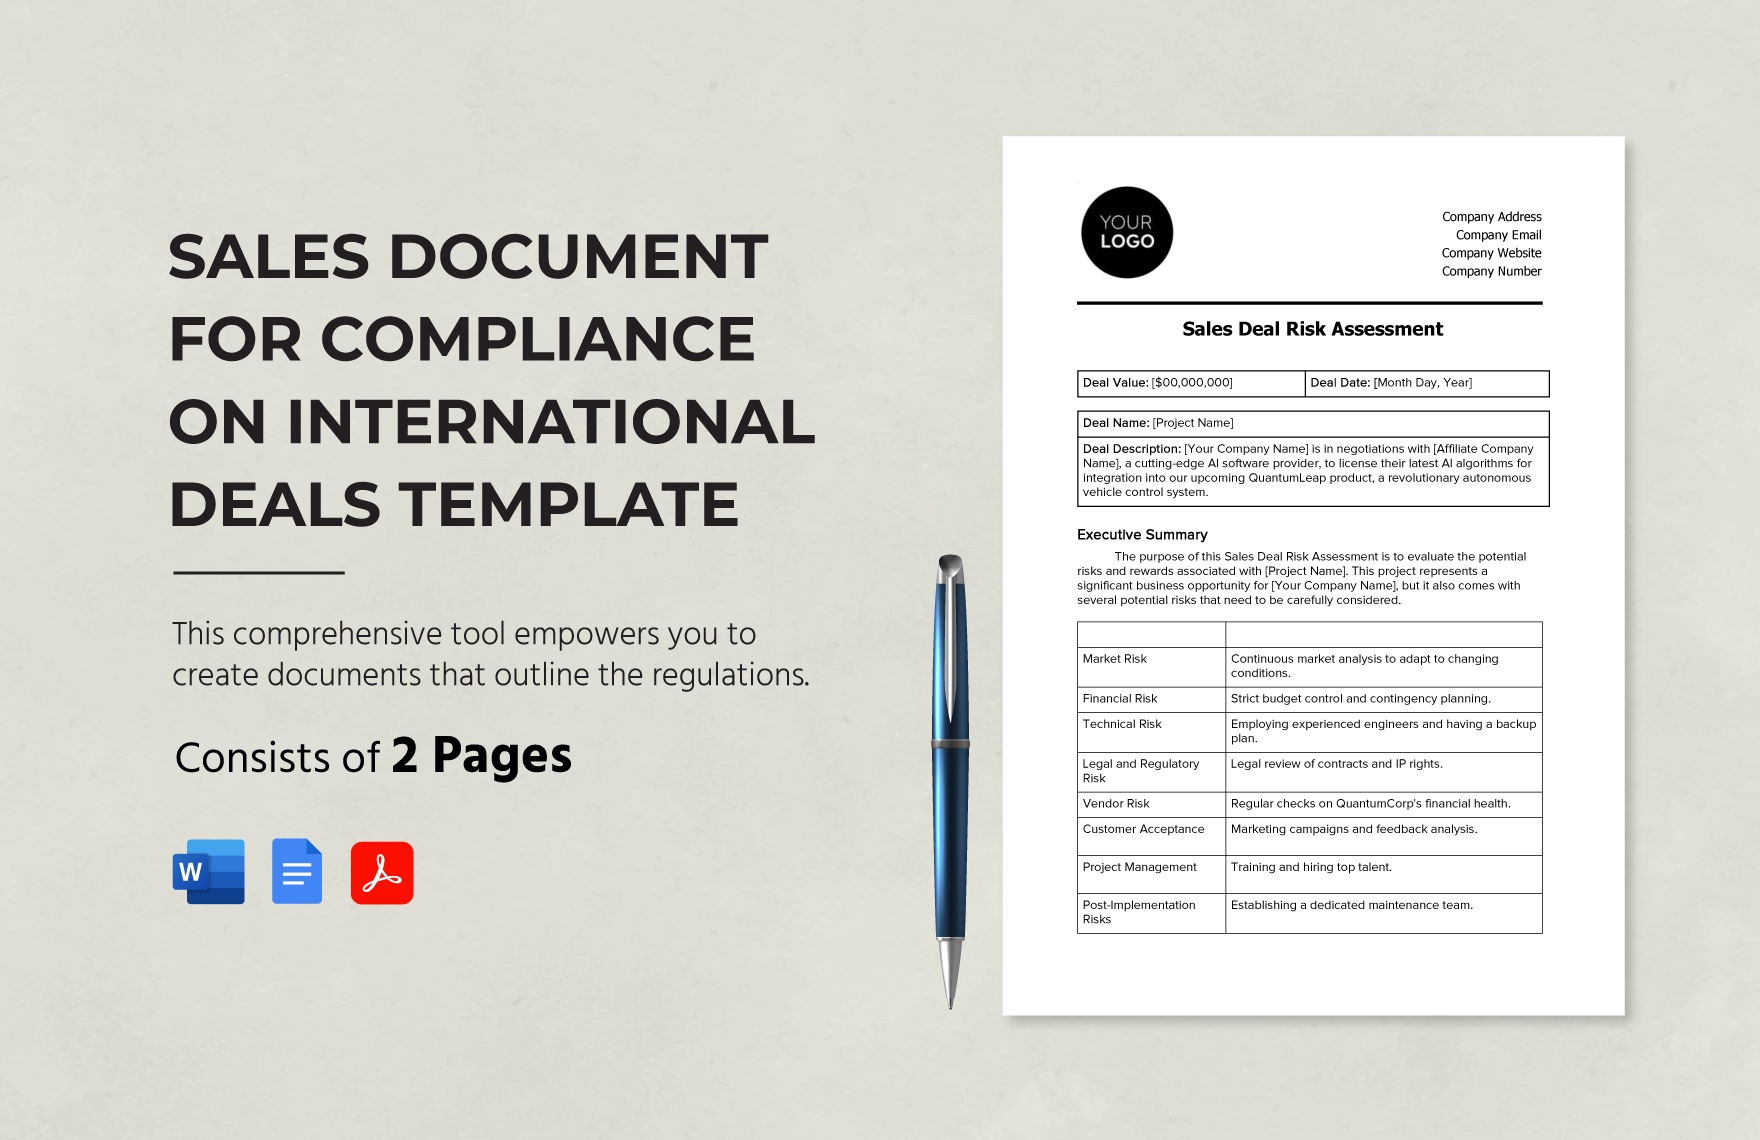 Sales Document for Compliance on International Deals Template